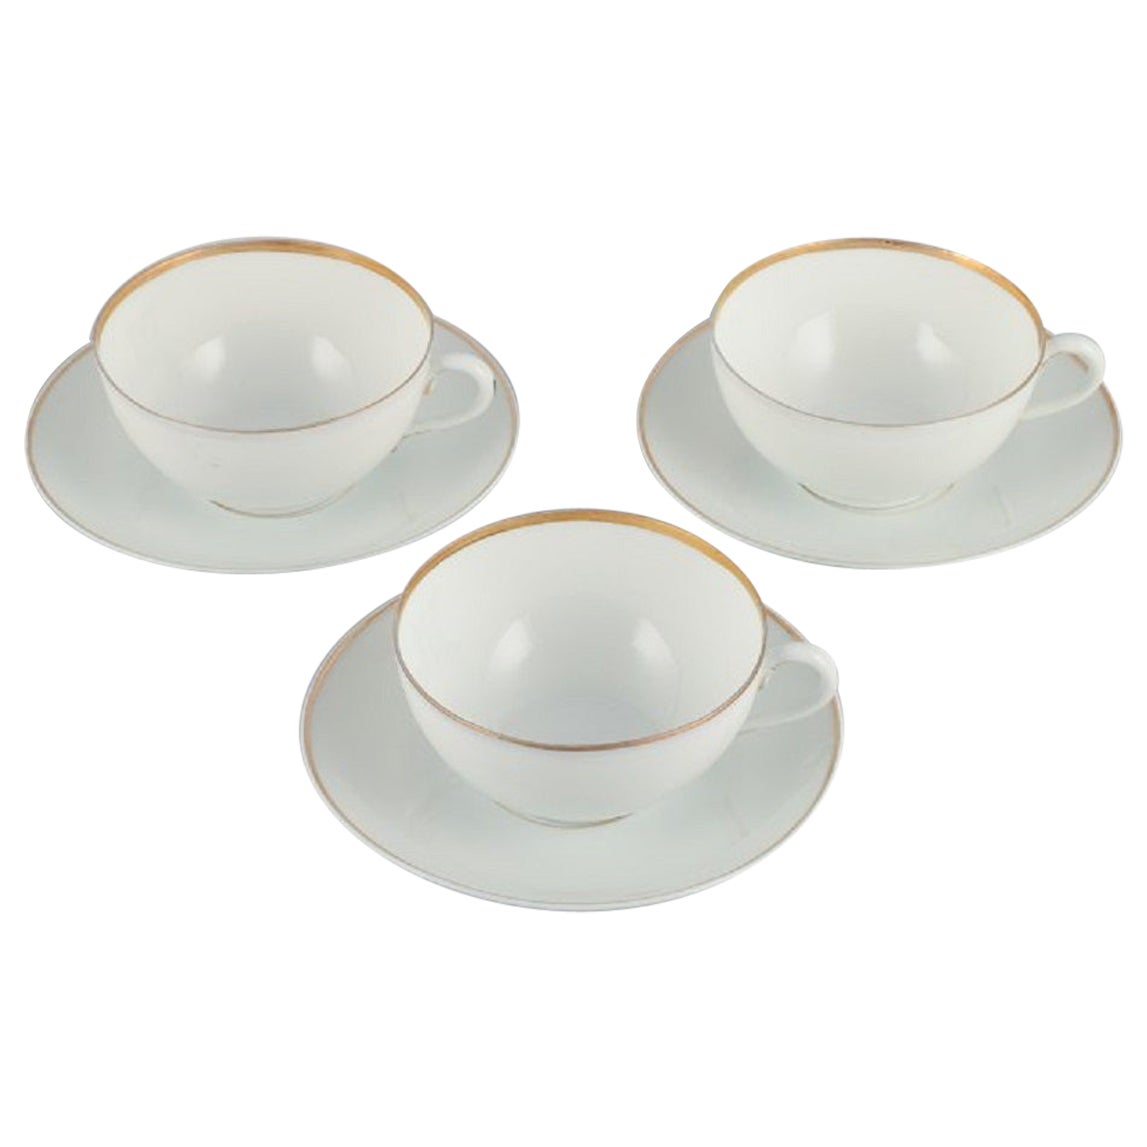 Rosenthal, Germany, Set of Three Large Teacups and Matching Porcelain Saucers